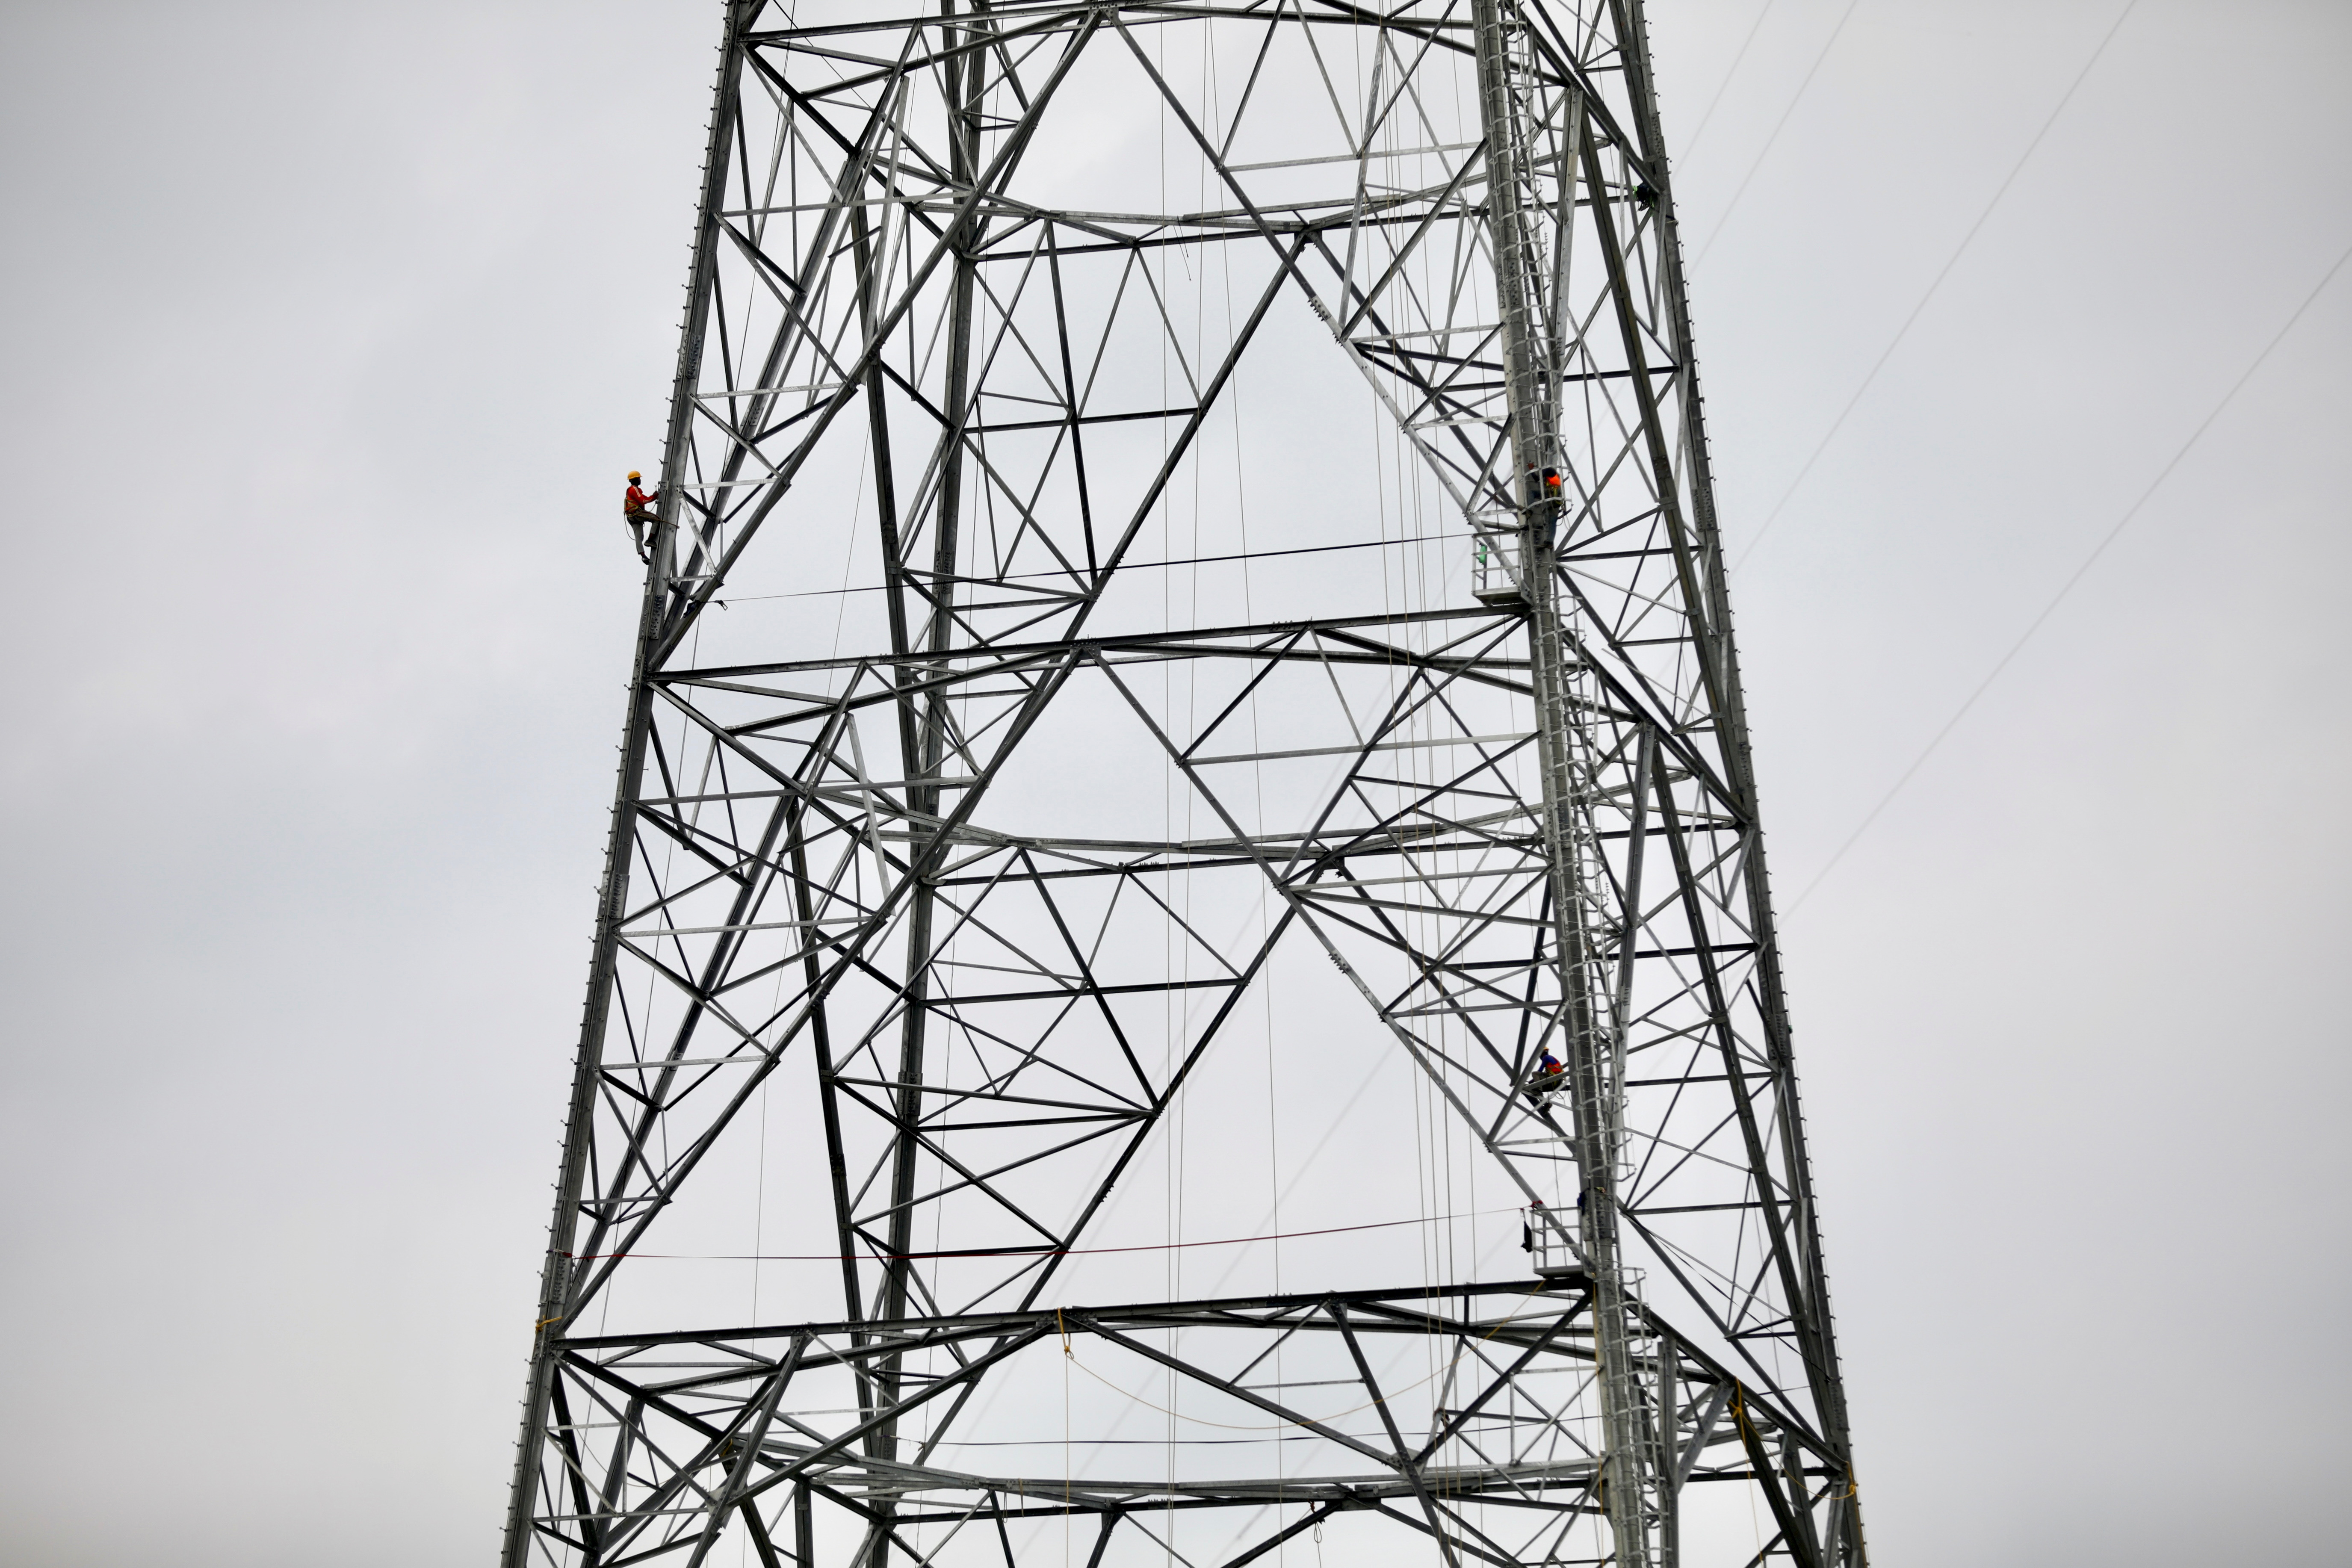 A worker climbs an under construction power transmission tower in Munshiganj